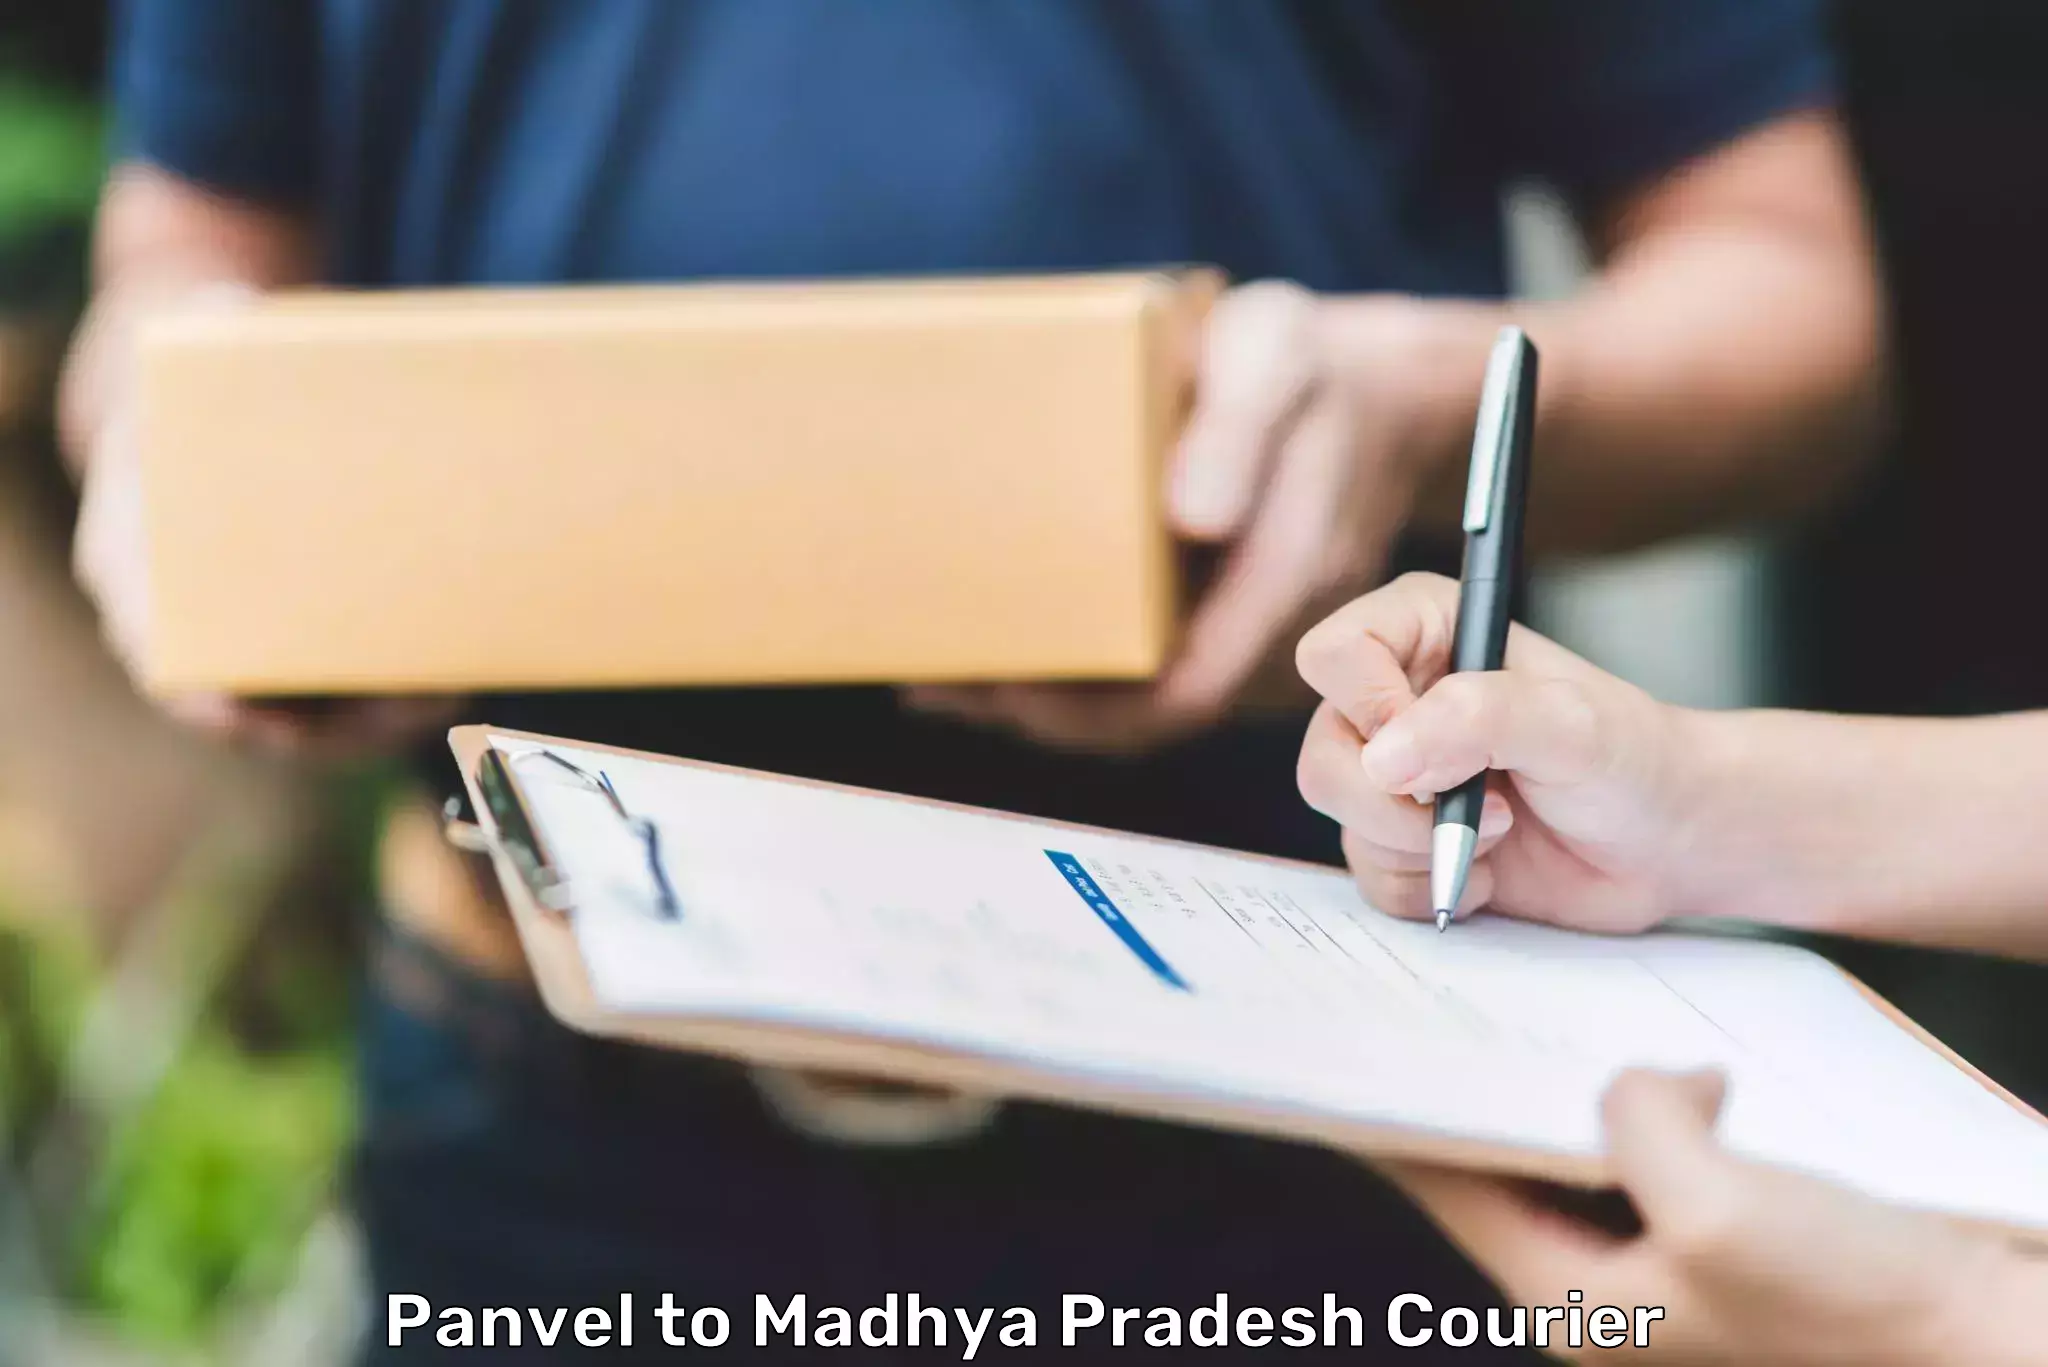 Subscription-based courier Panvel to Umaria